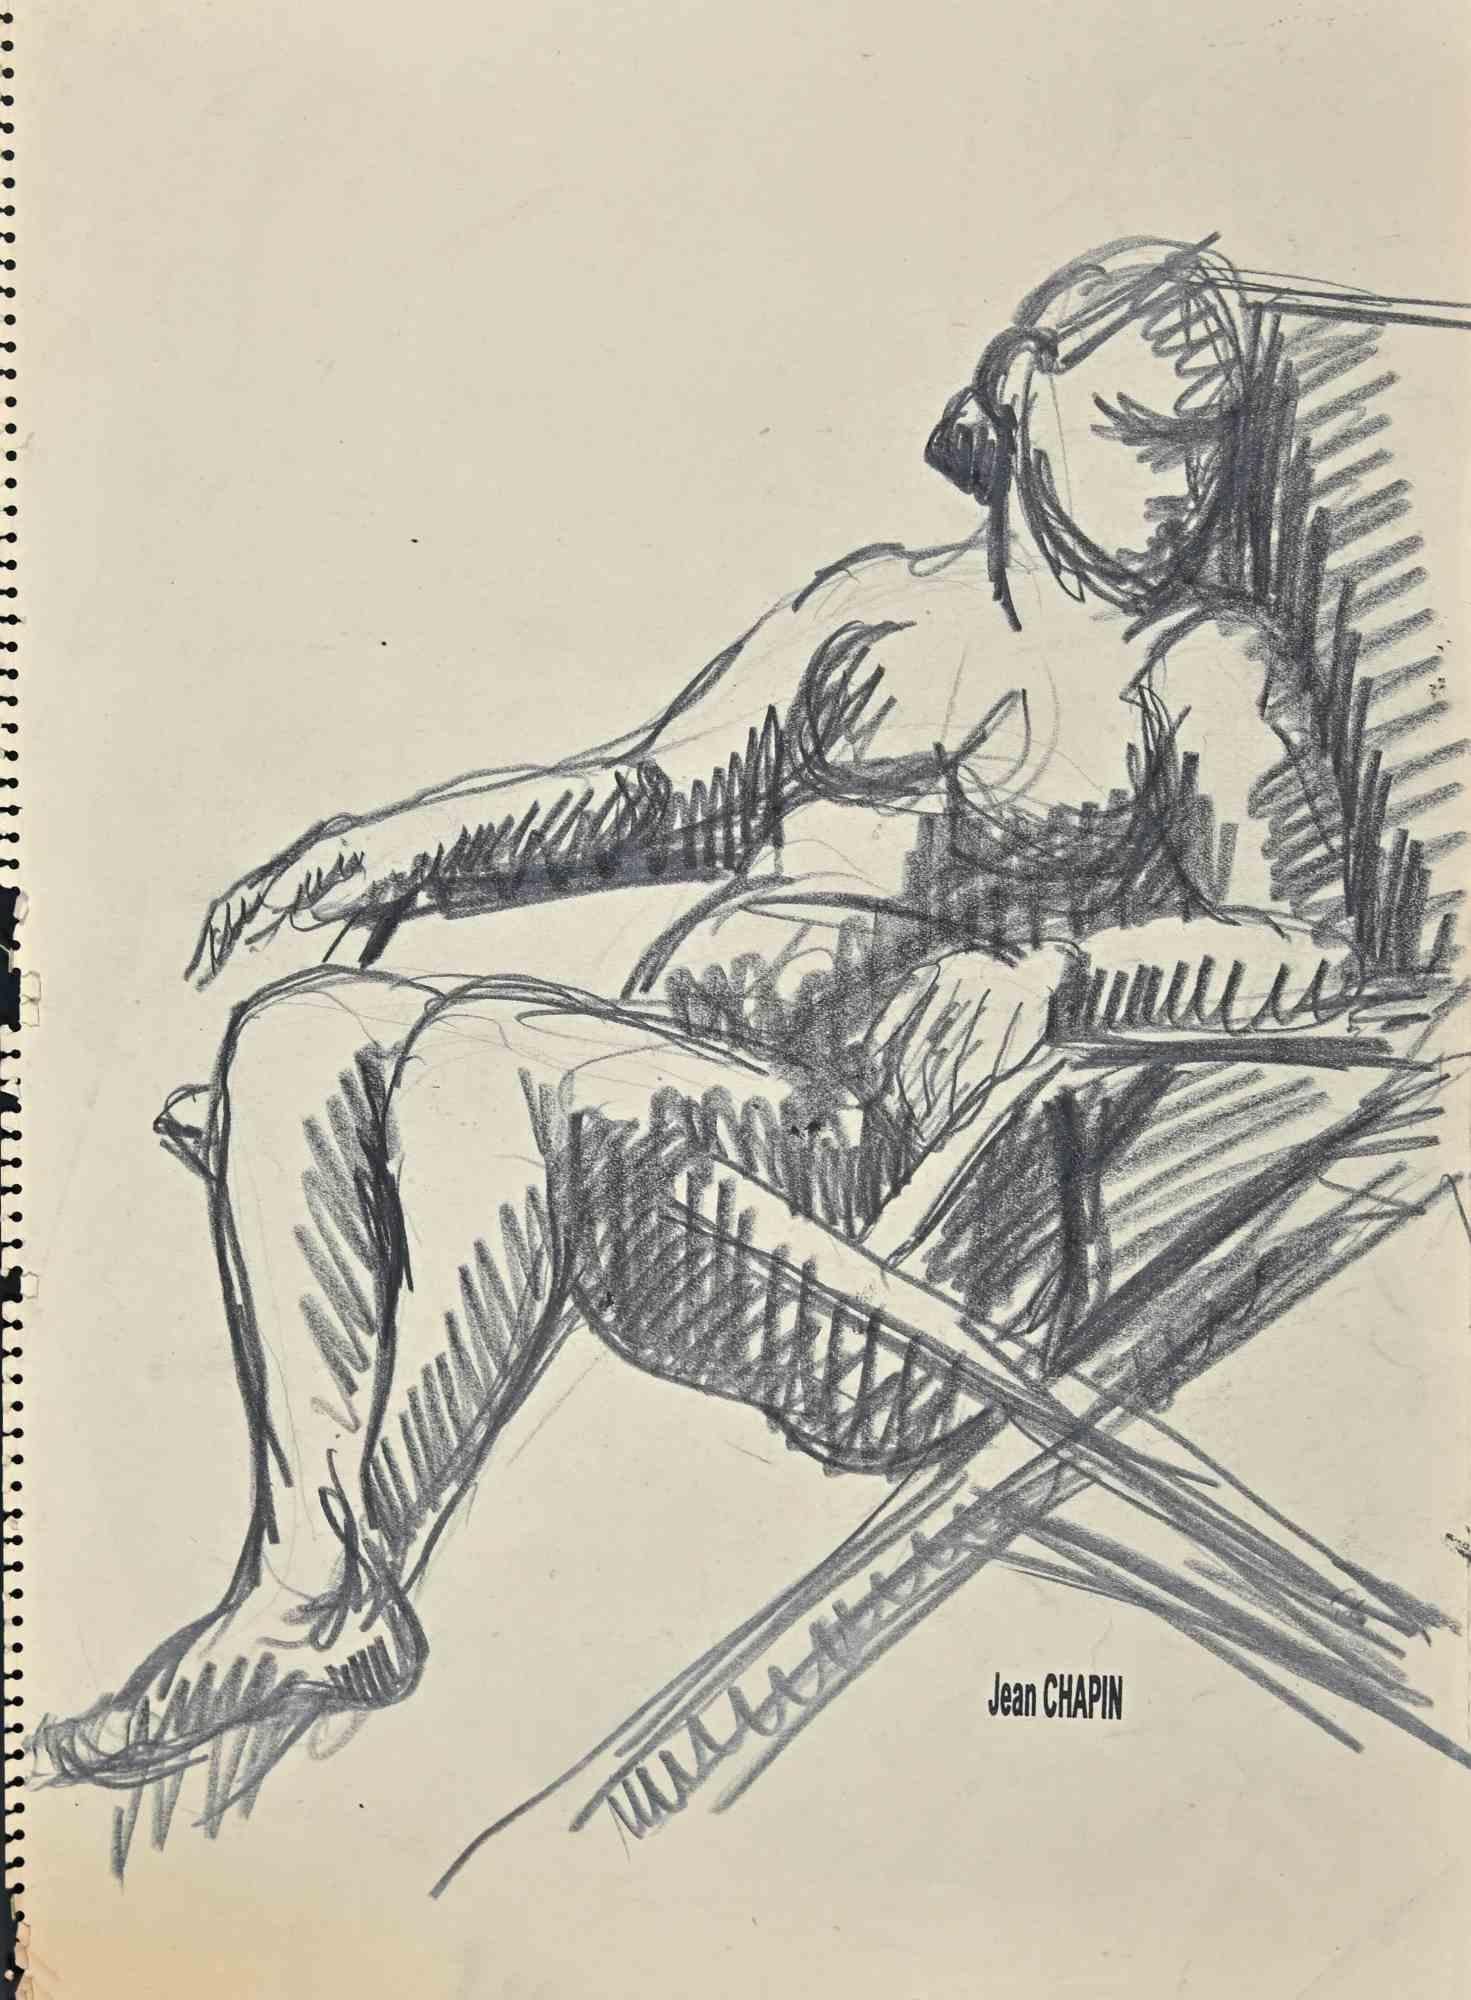 Nude of Woman is a pencil drawing realized by Jean Chapin in 1930s.

Signature stamp on the yellowed paper.

Good condition, except for being aged.

Jean Chapin is a French painter and lithographer born on 21 February 1896 in Paris and died on 24